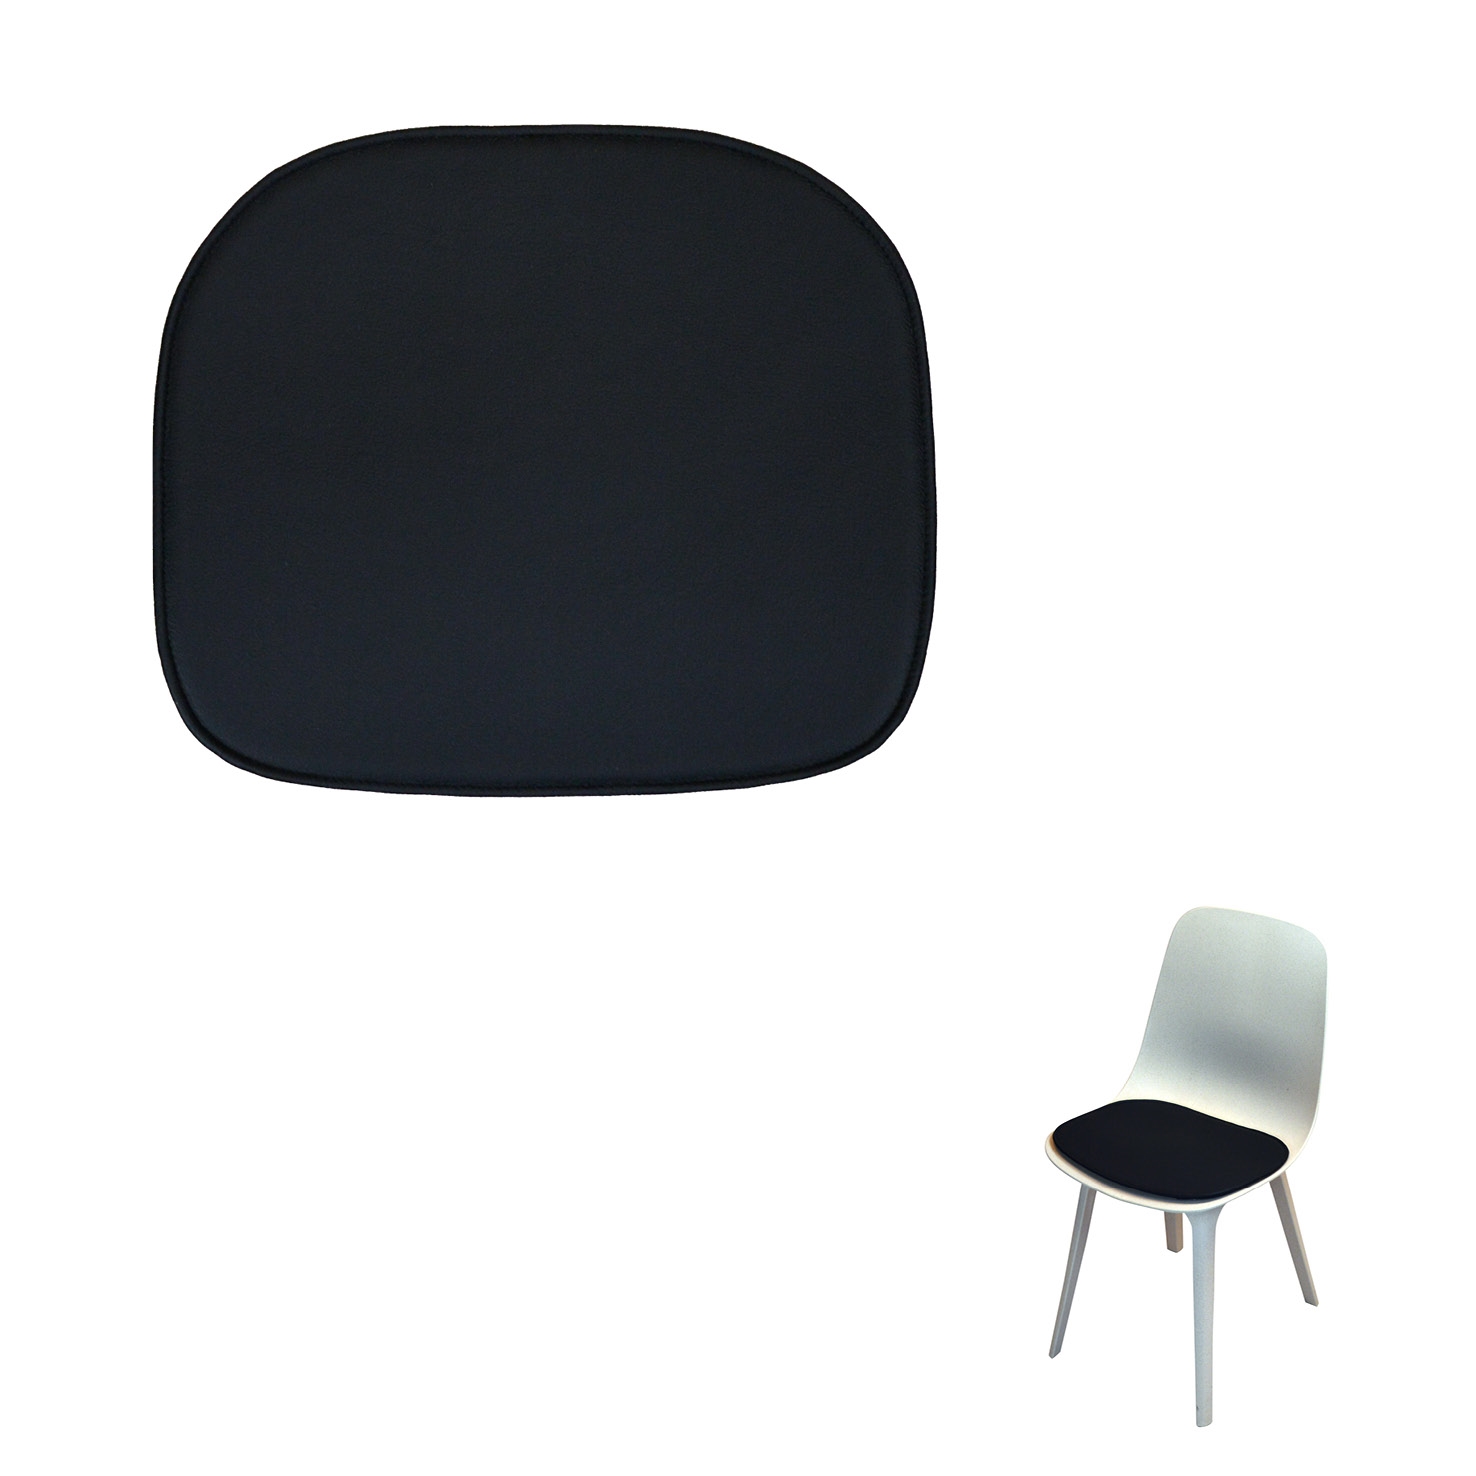 Non-reversible Standard Seat cushion in Melrose for the Ikea Odger chairs by J. og J. Pettersson